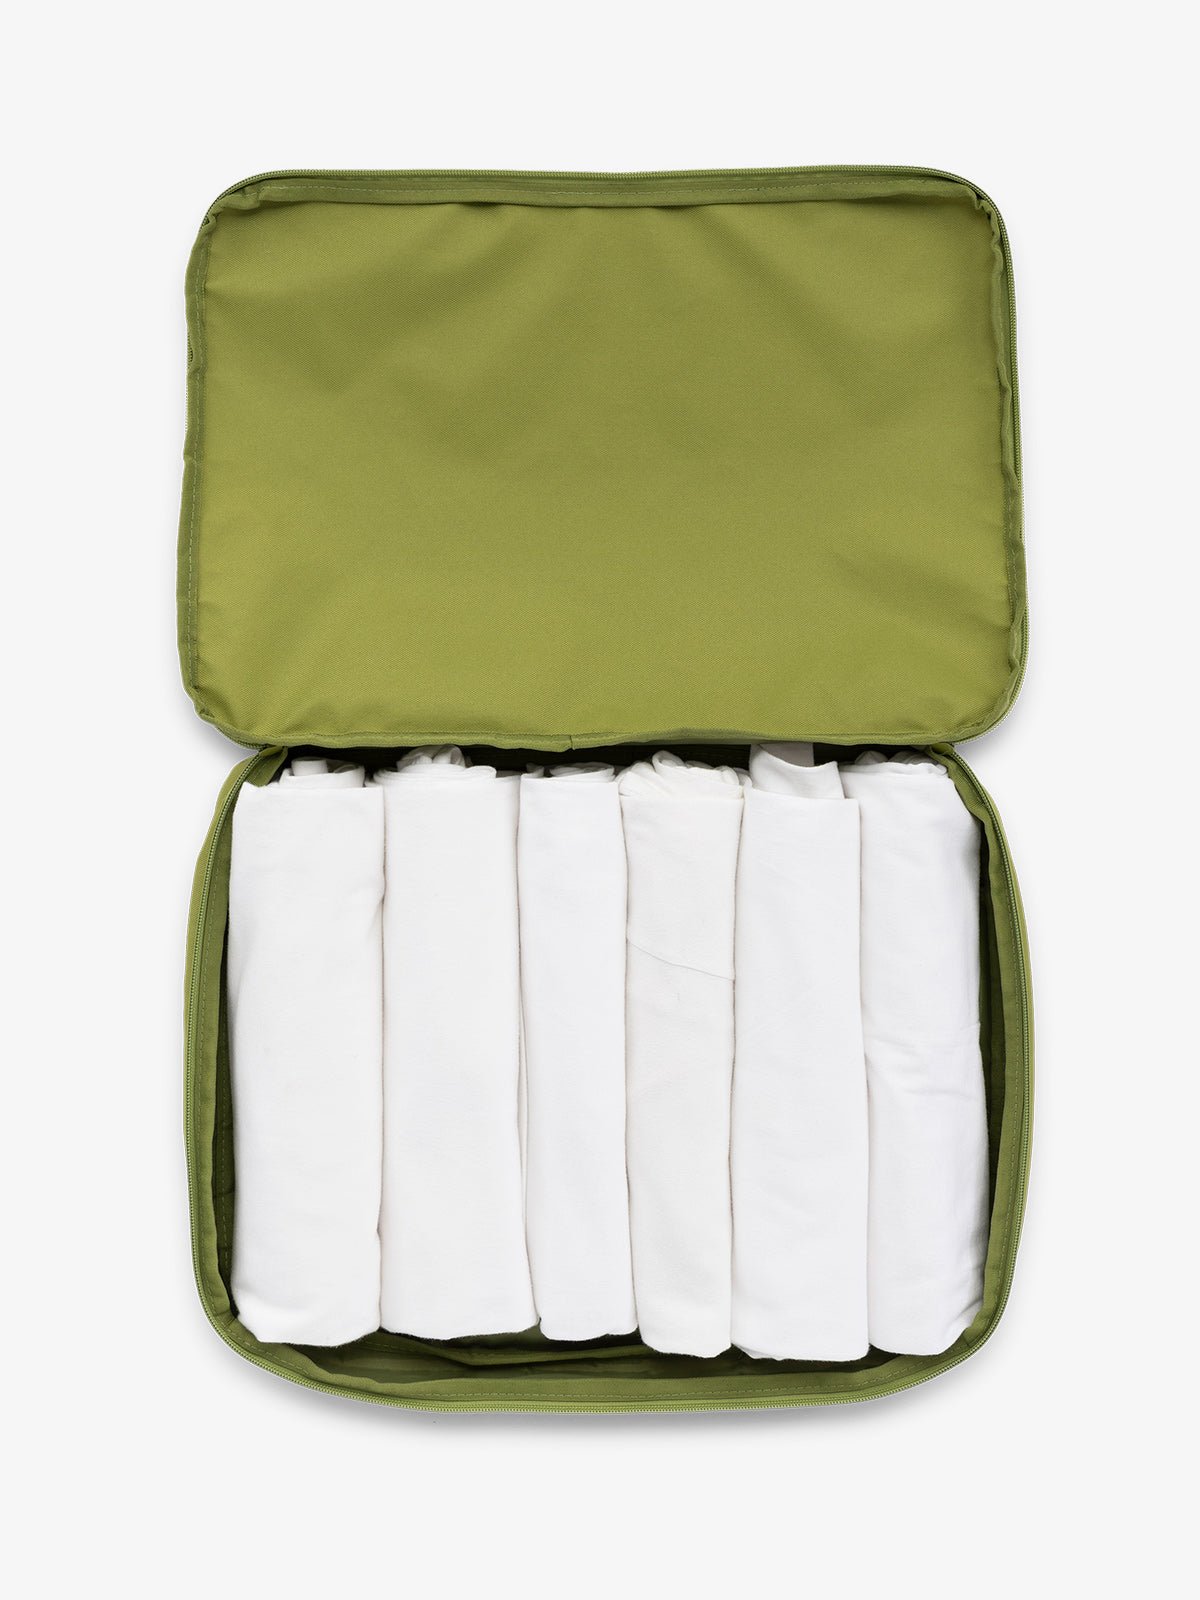 CALPAK Large Compression Packing cubes for travel made with durable materials in palm